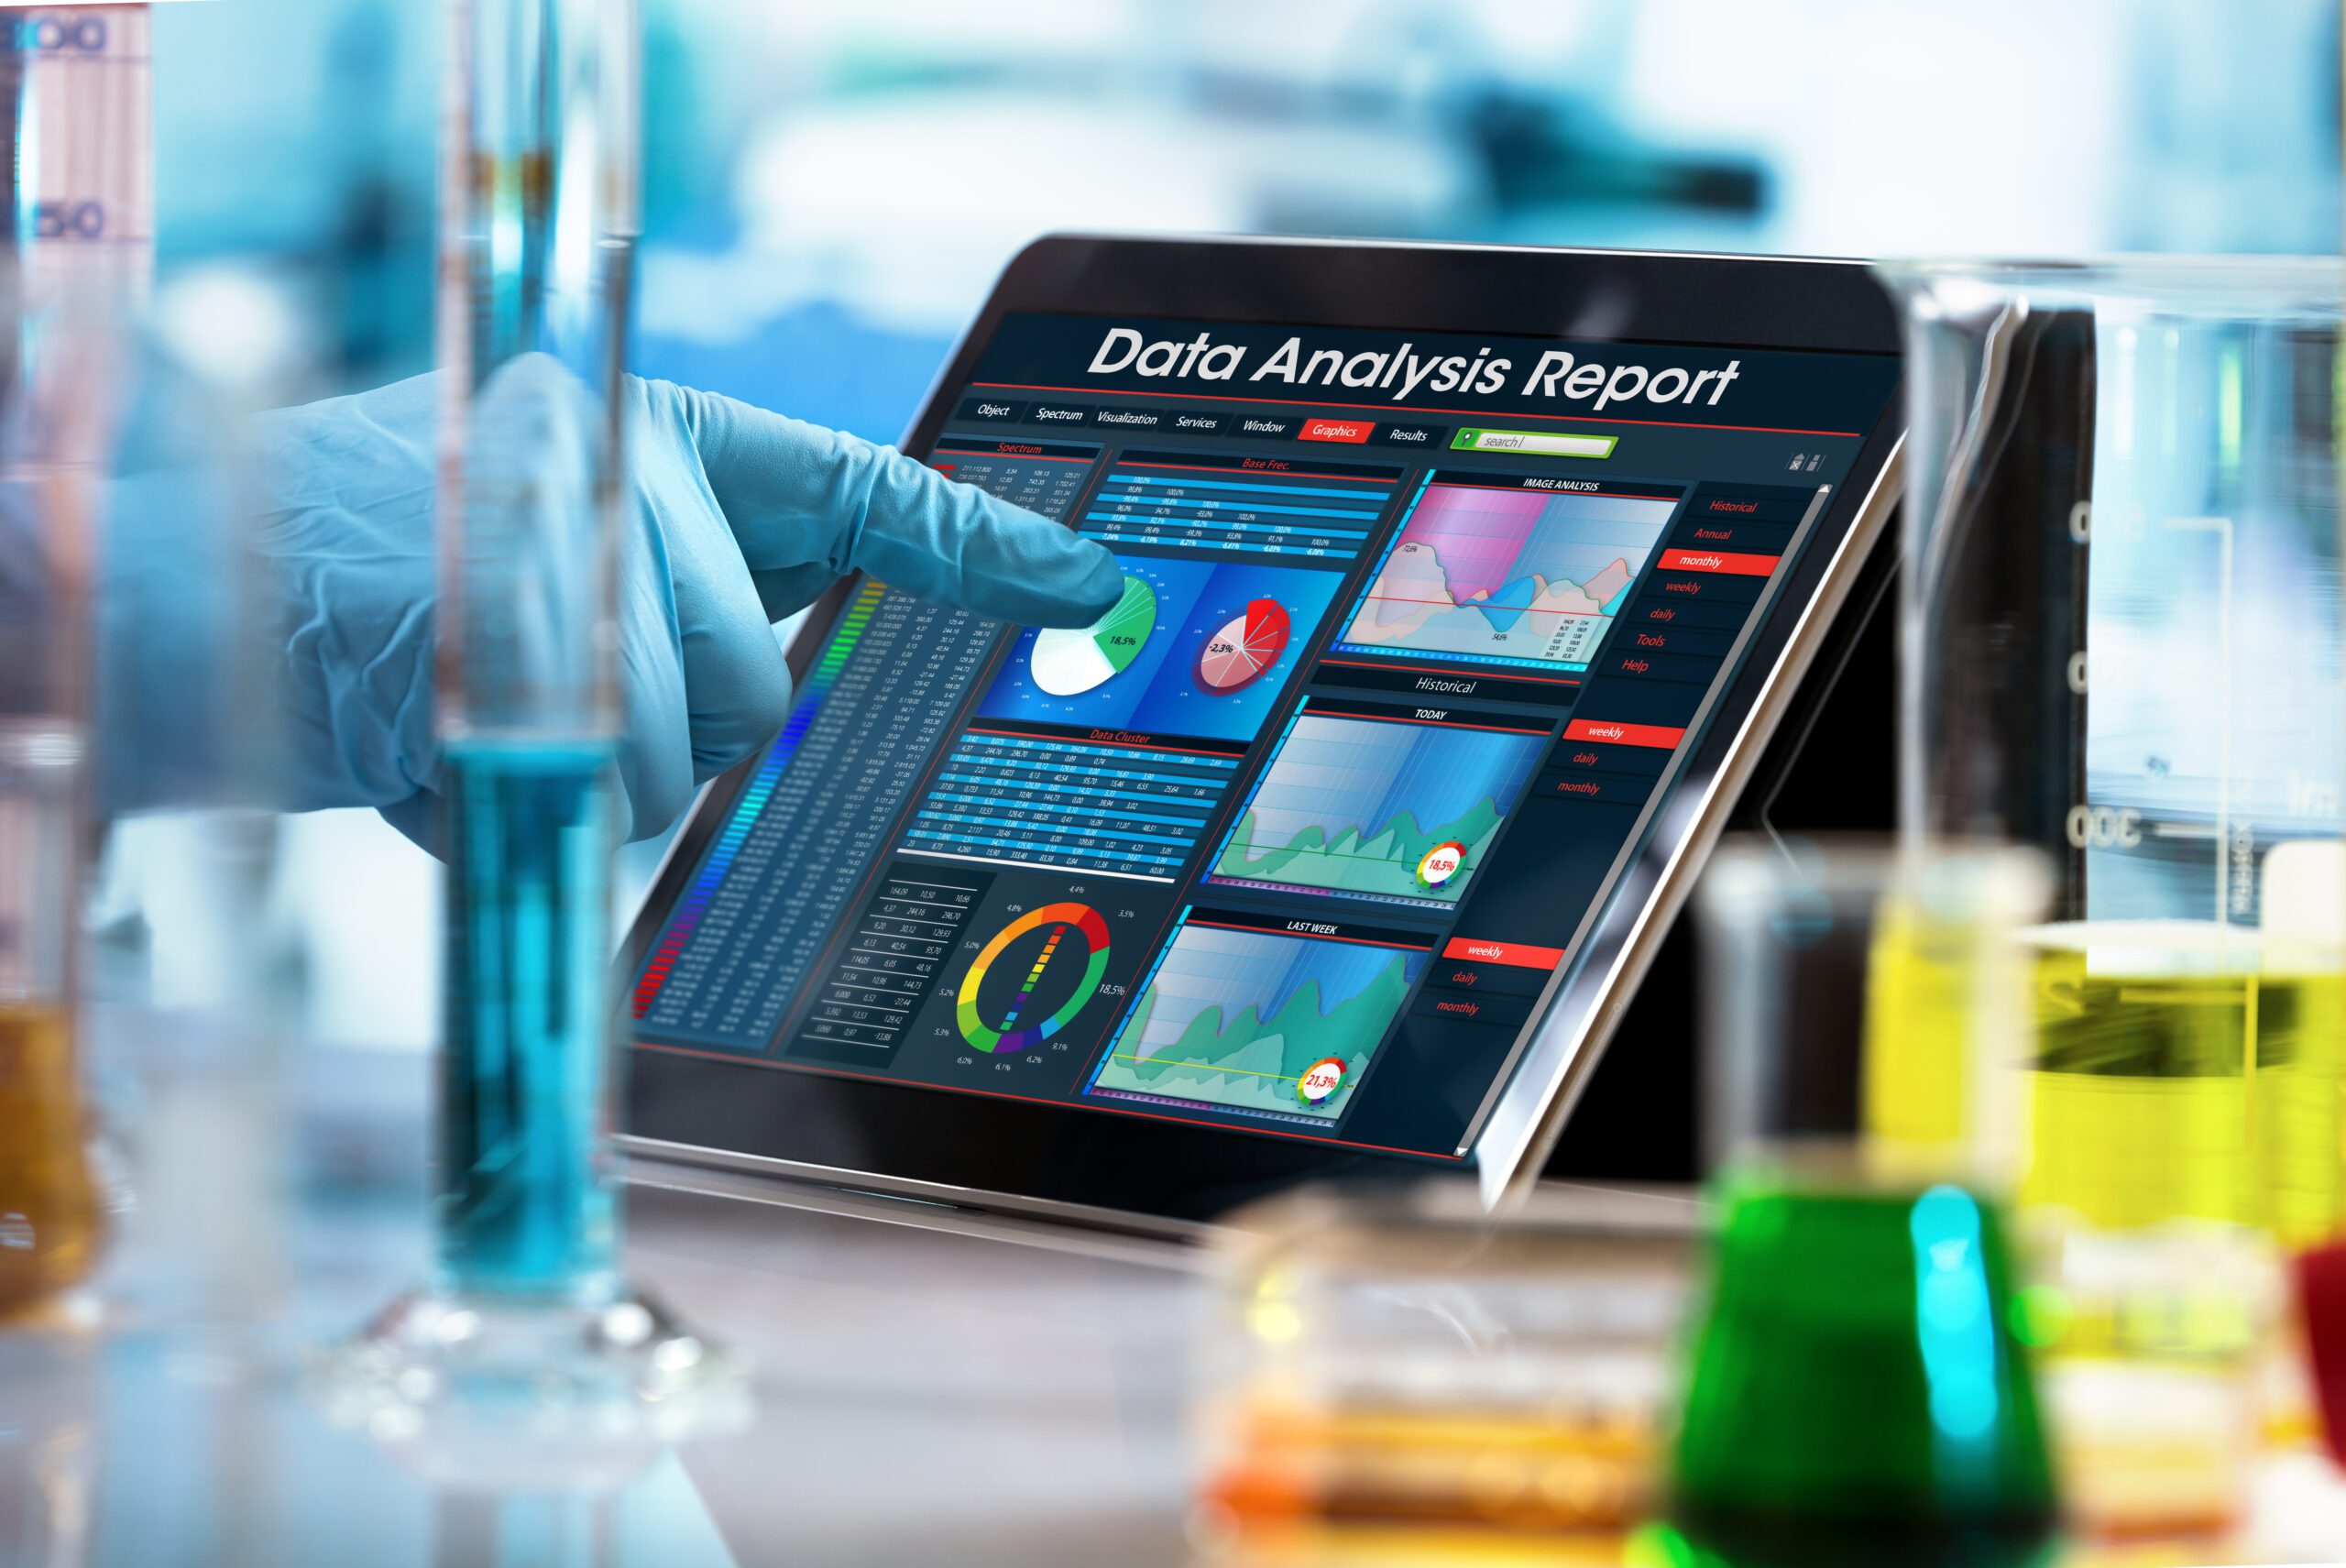 Image, researcher working with data analysis report in digital tablet representing RCH Solutions' Data Management Services for Life Sciences teams.